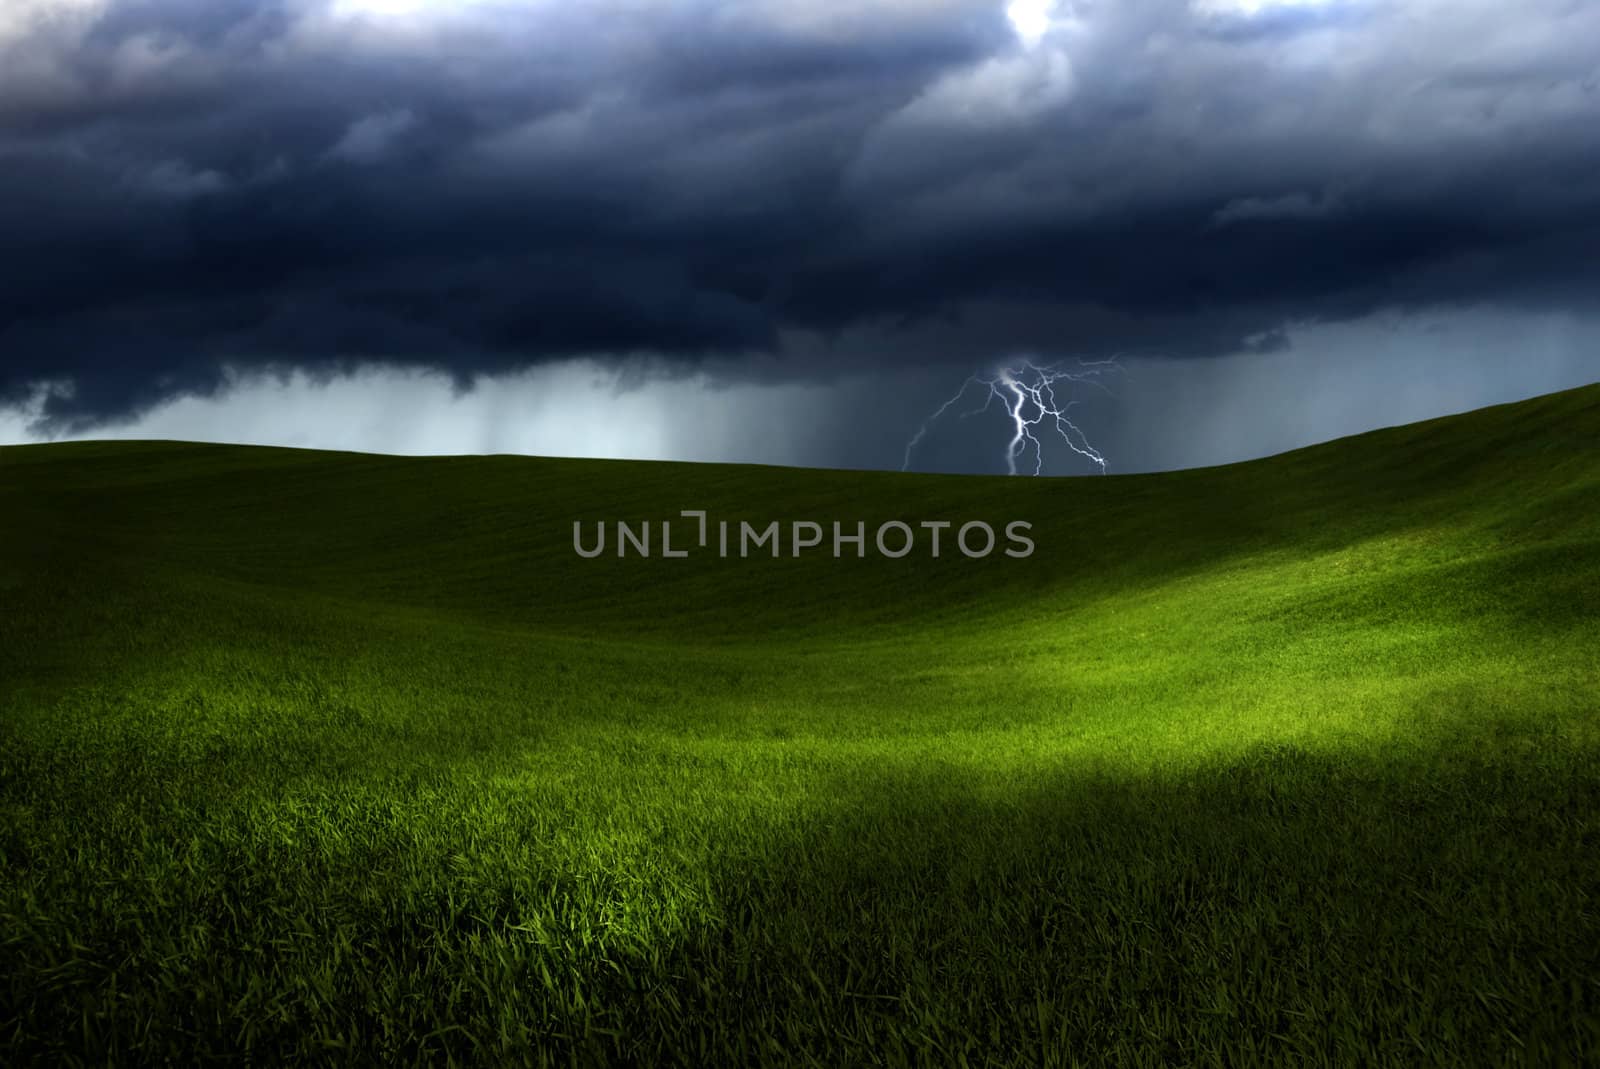 Beautiful green meadow with storm clouds and thunders	